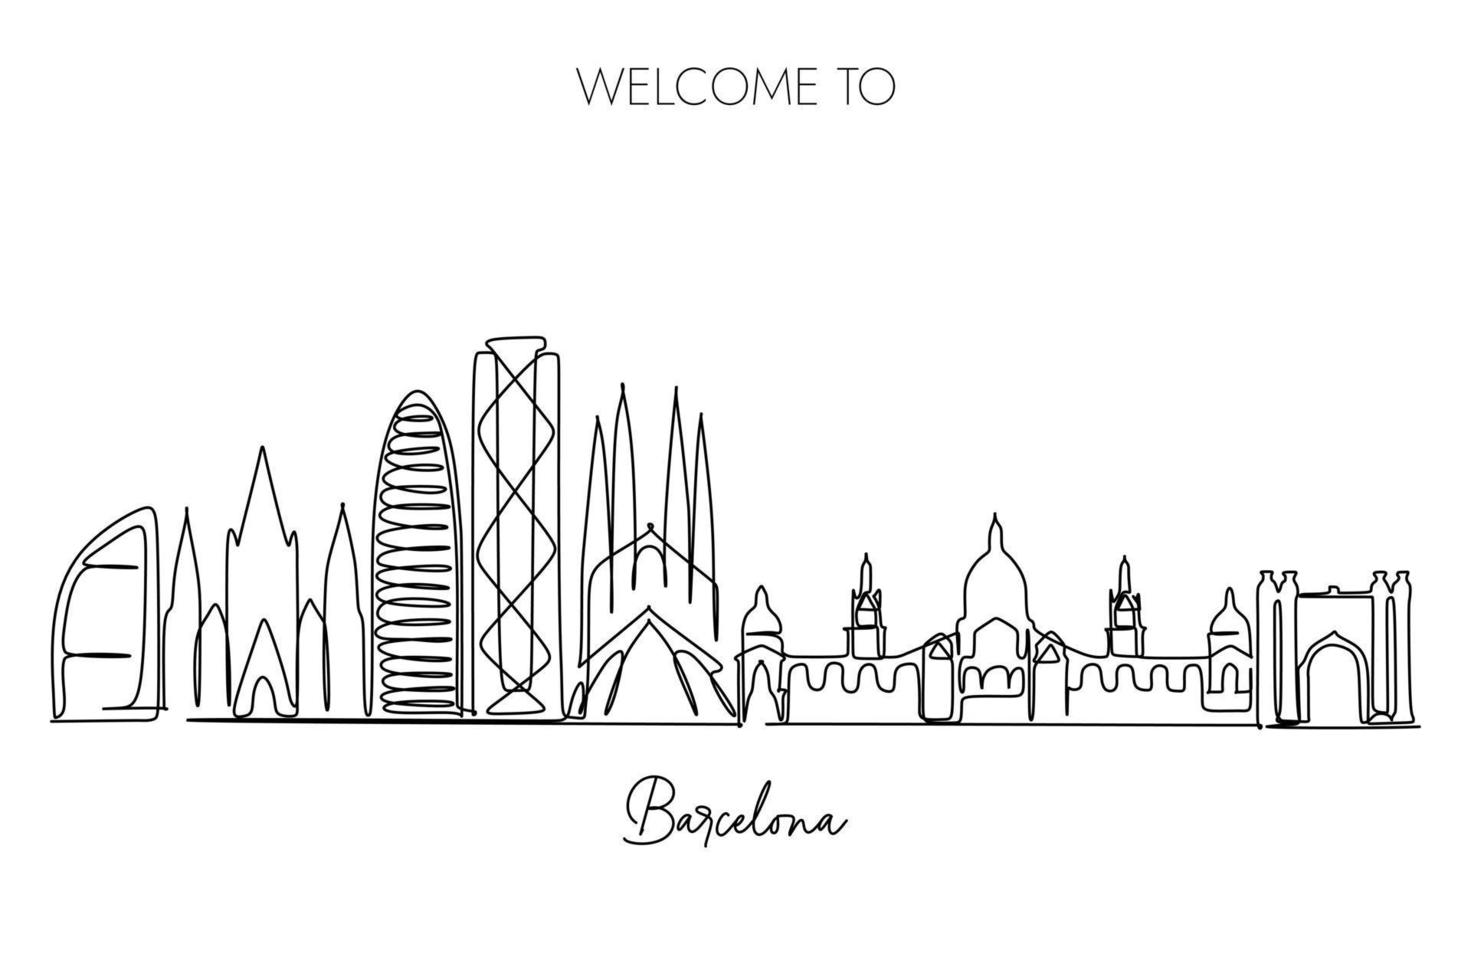 Barcelona skyline one continuous line drawing on white background, Hand drawn style design for travel and tourism illustration vector